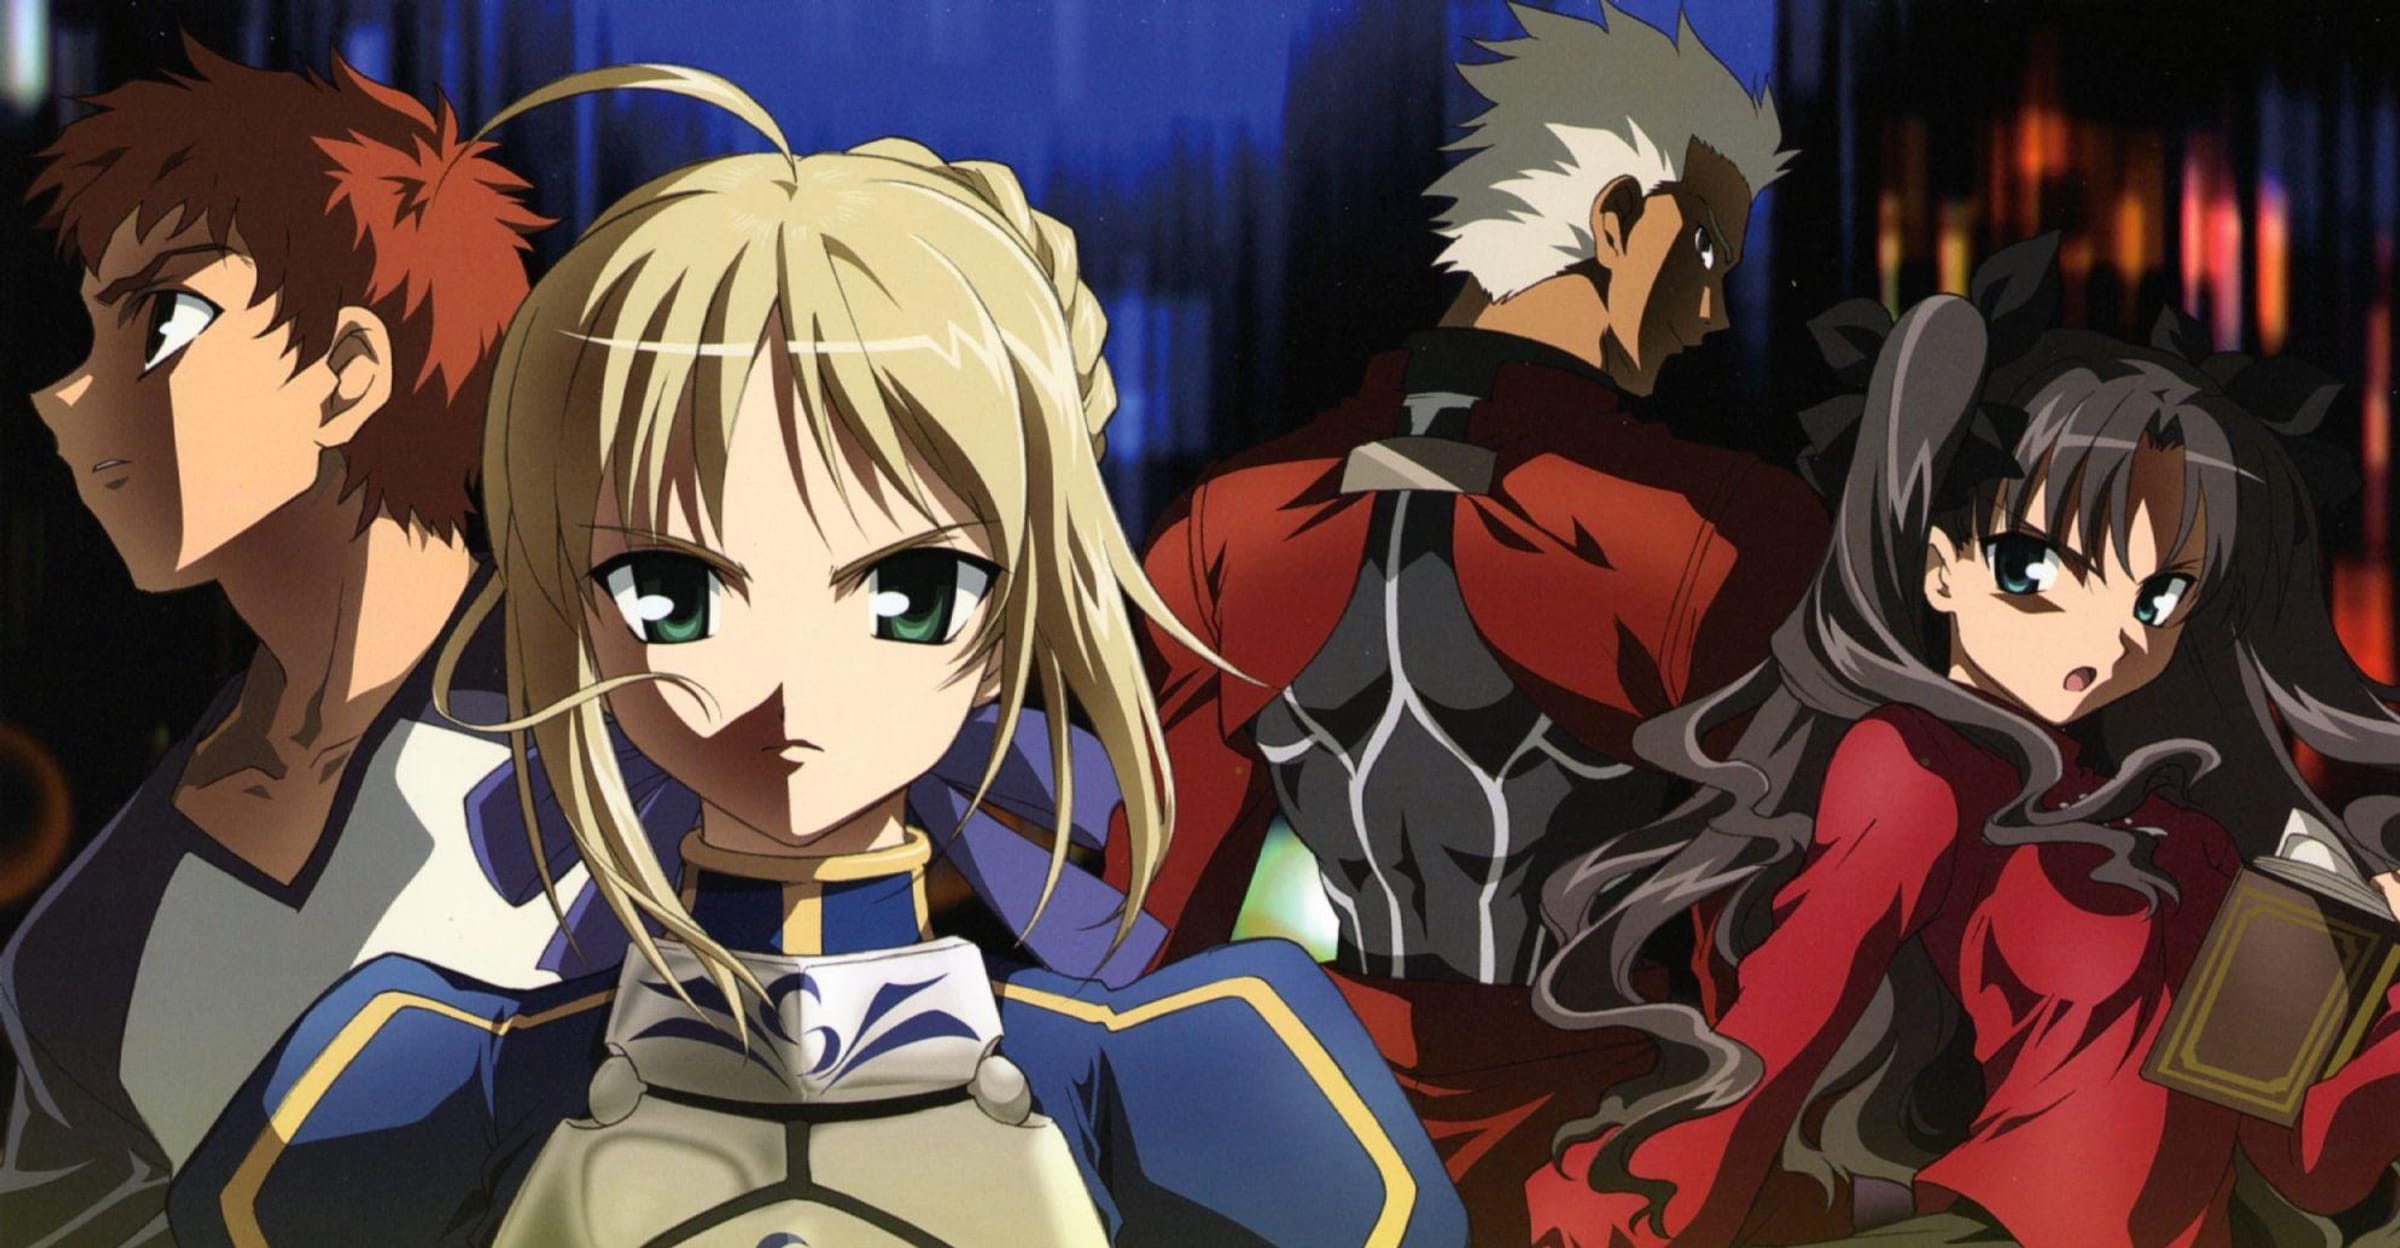 Fate character  Fate stay night anime, Fate anime series, Anime